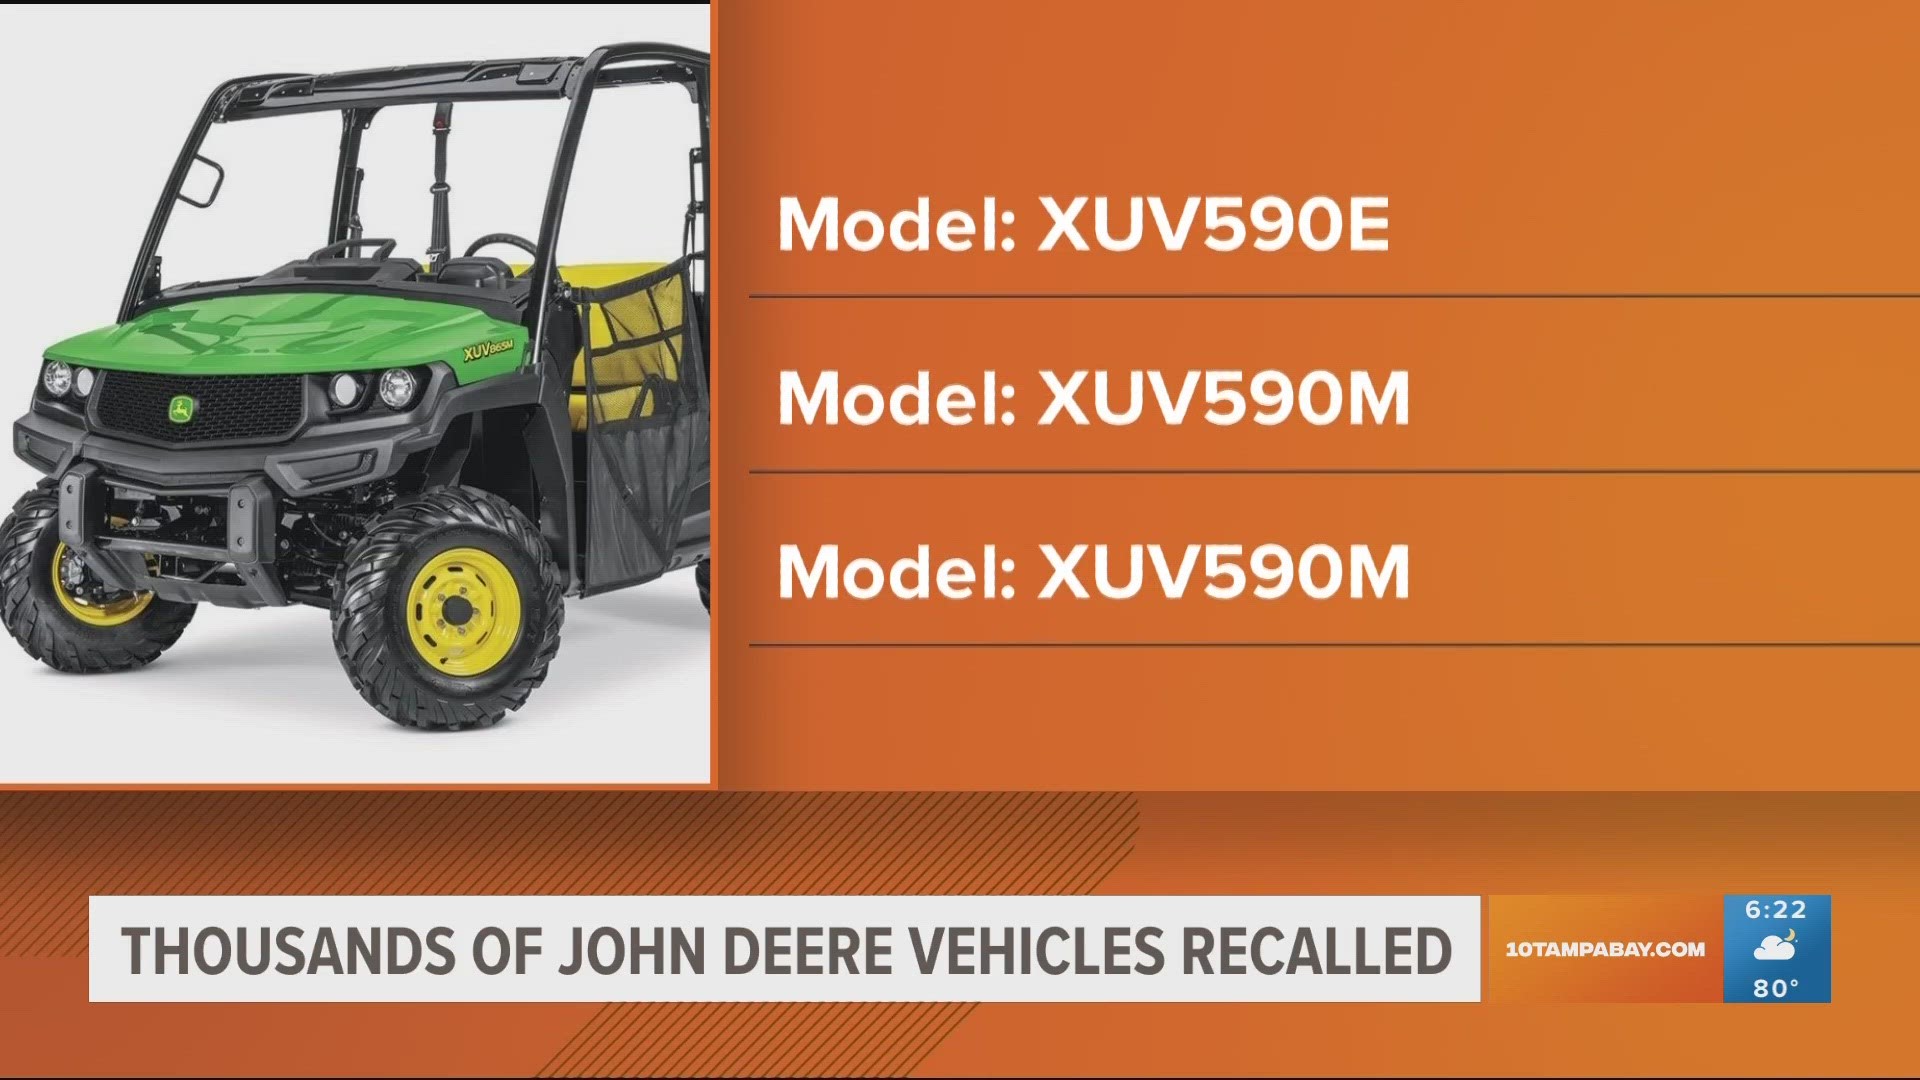 Those who have the recalled models should stop using them immediately and contact an authorized dealer for a free inspection.